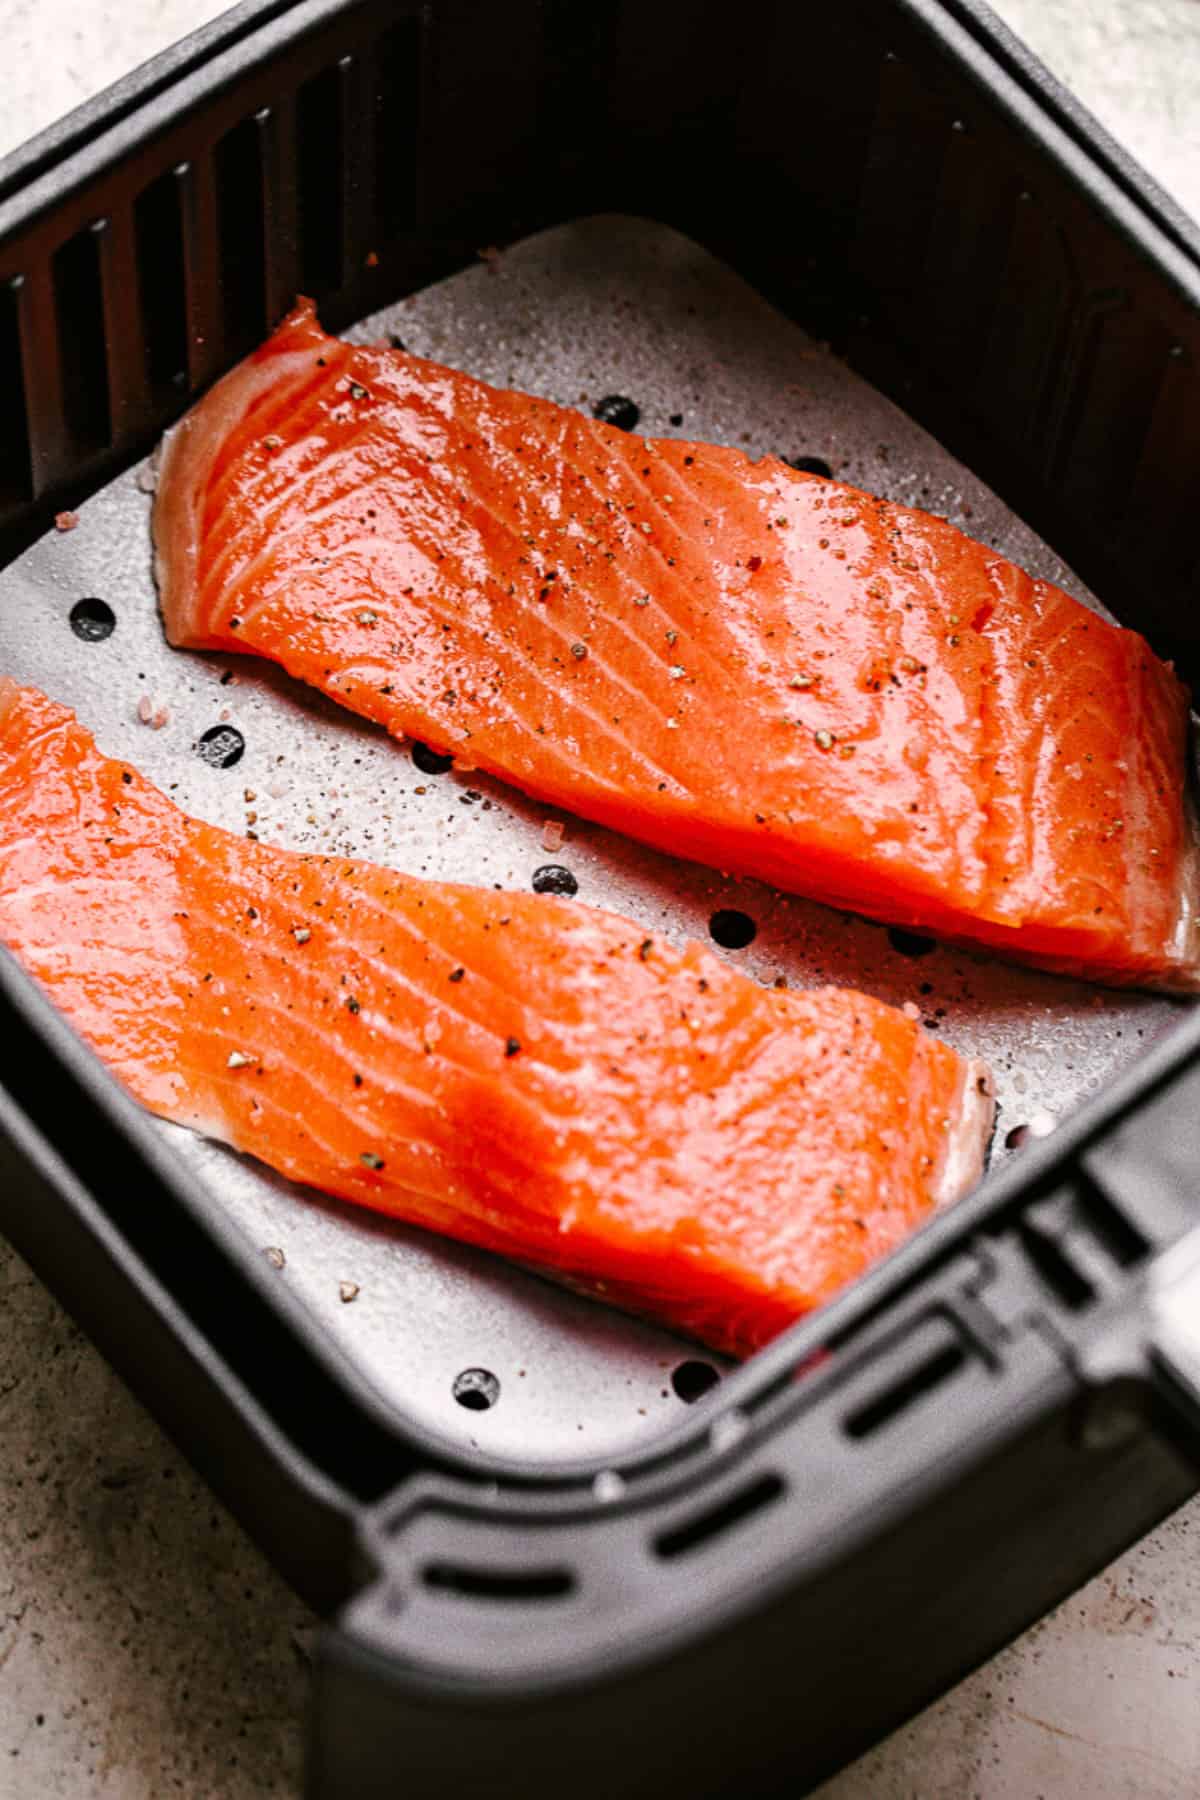 Two raw salmon fillets in an air fryer basket.